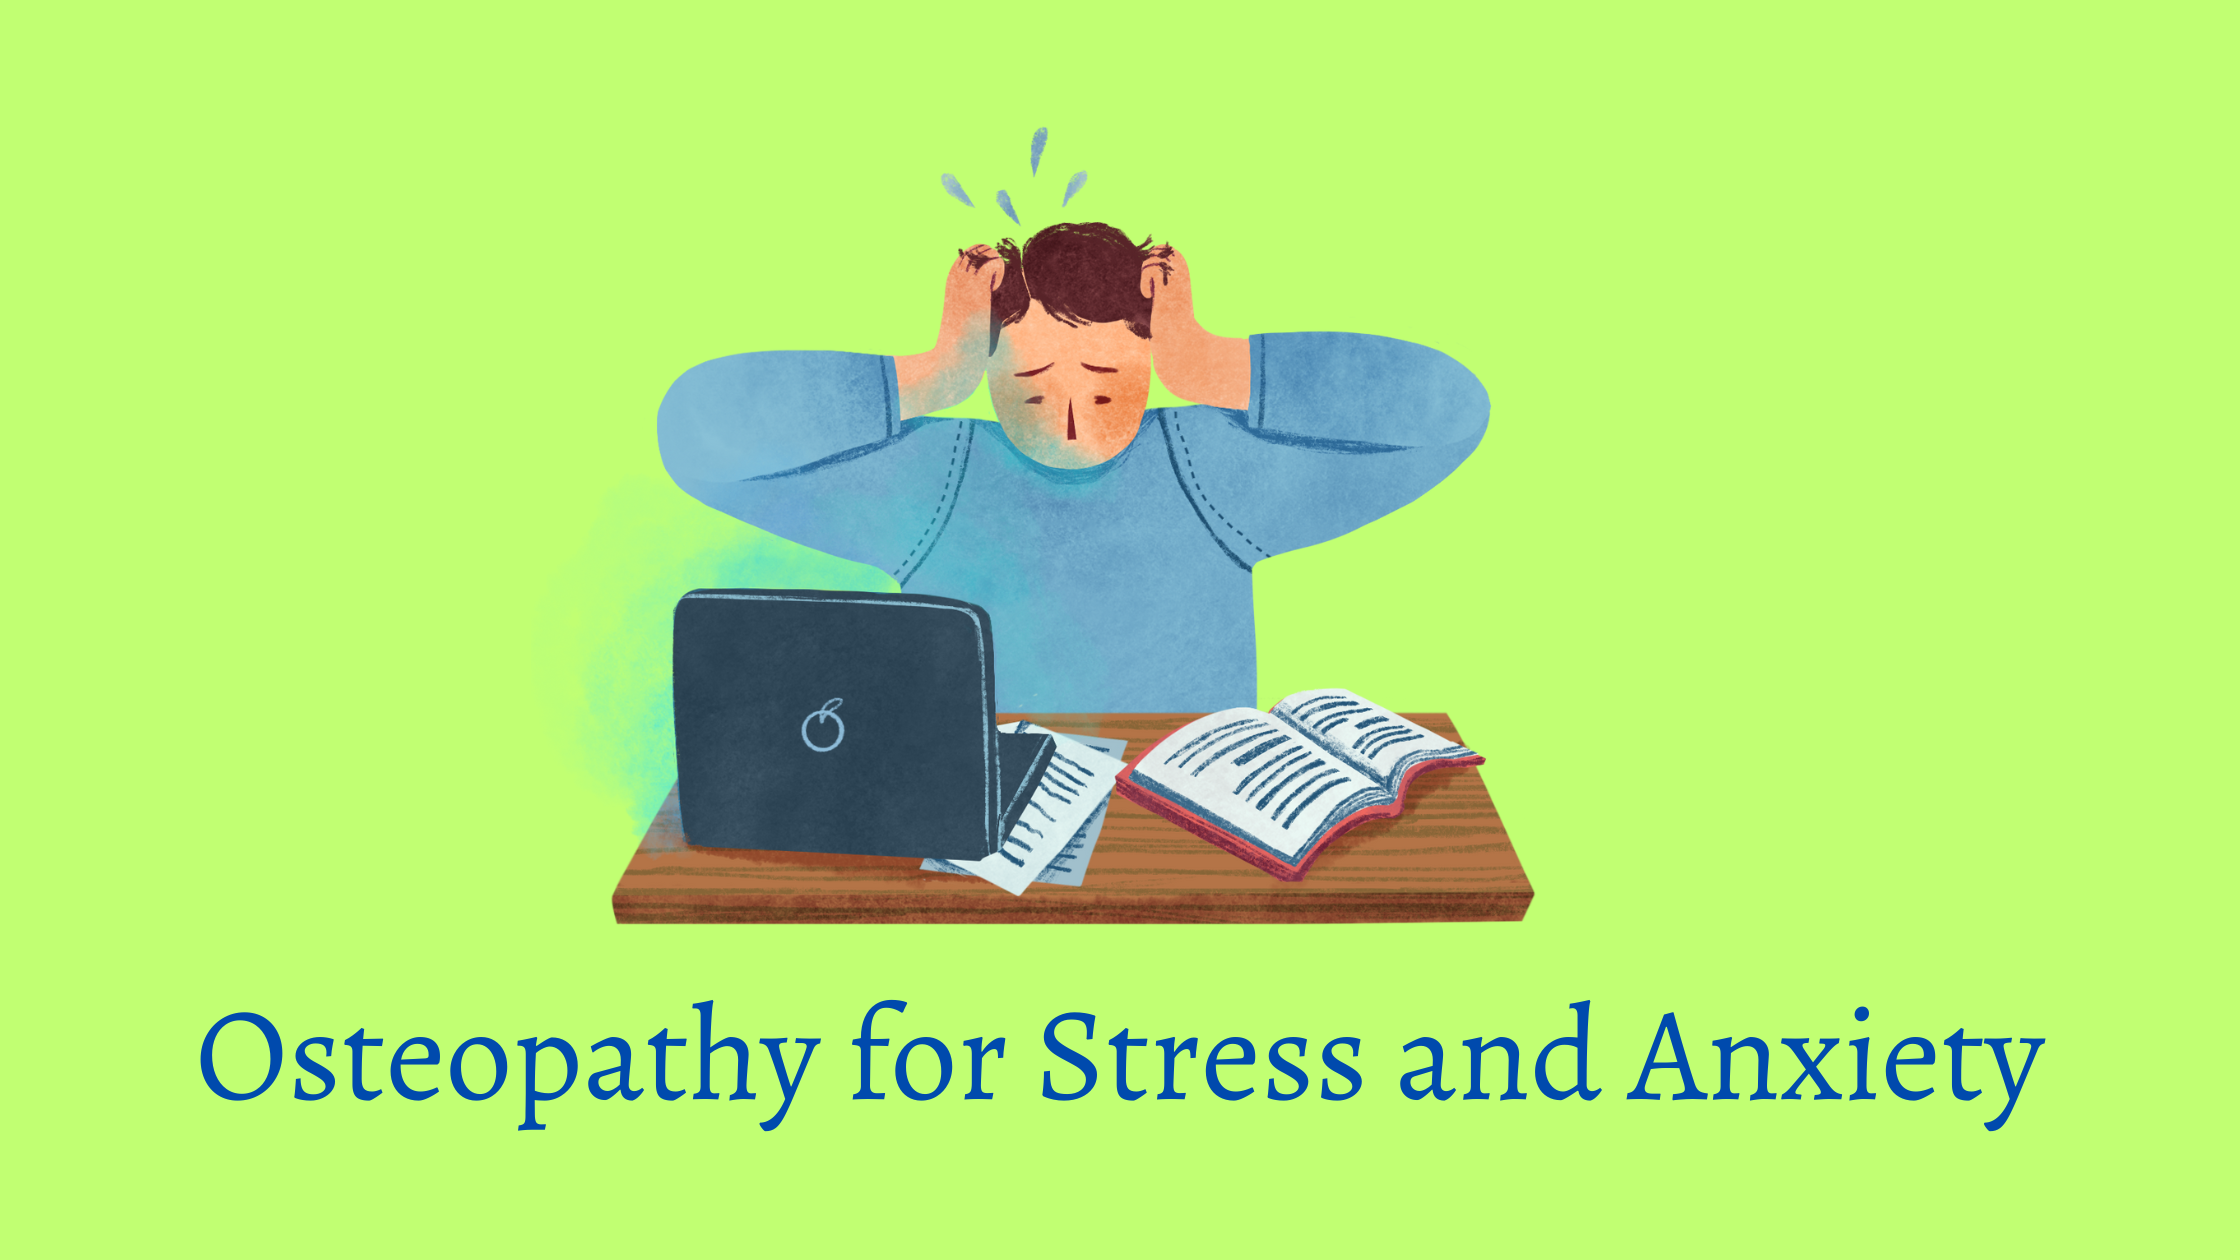 Osteopathy for Stress and Anxiety